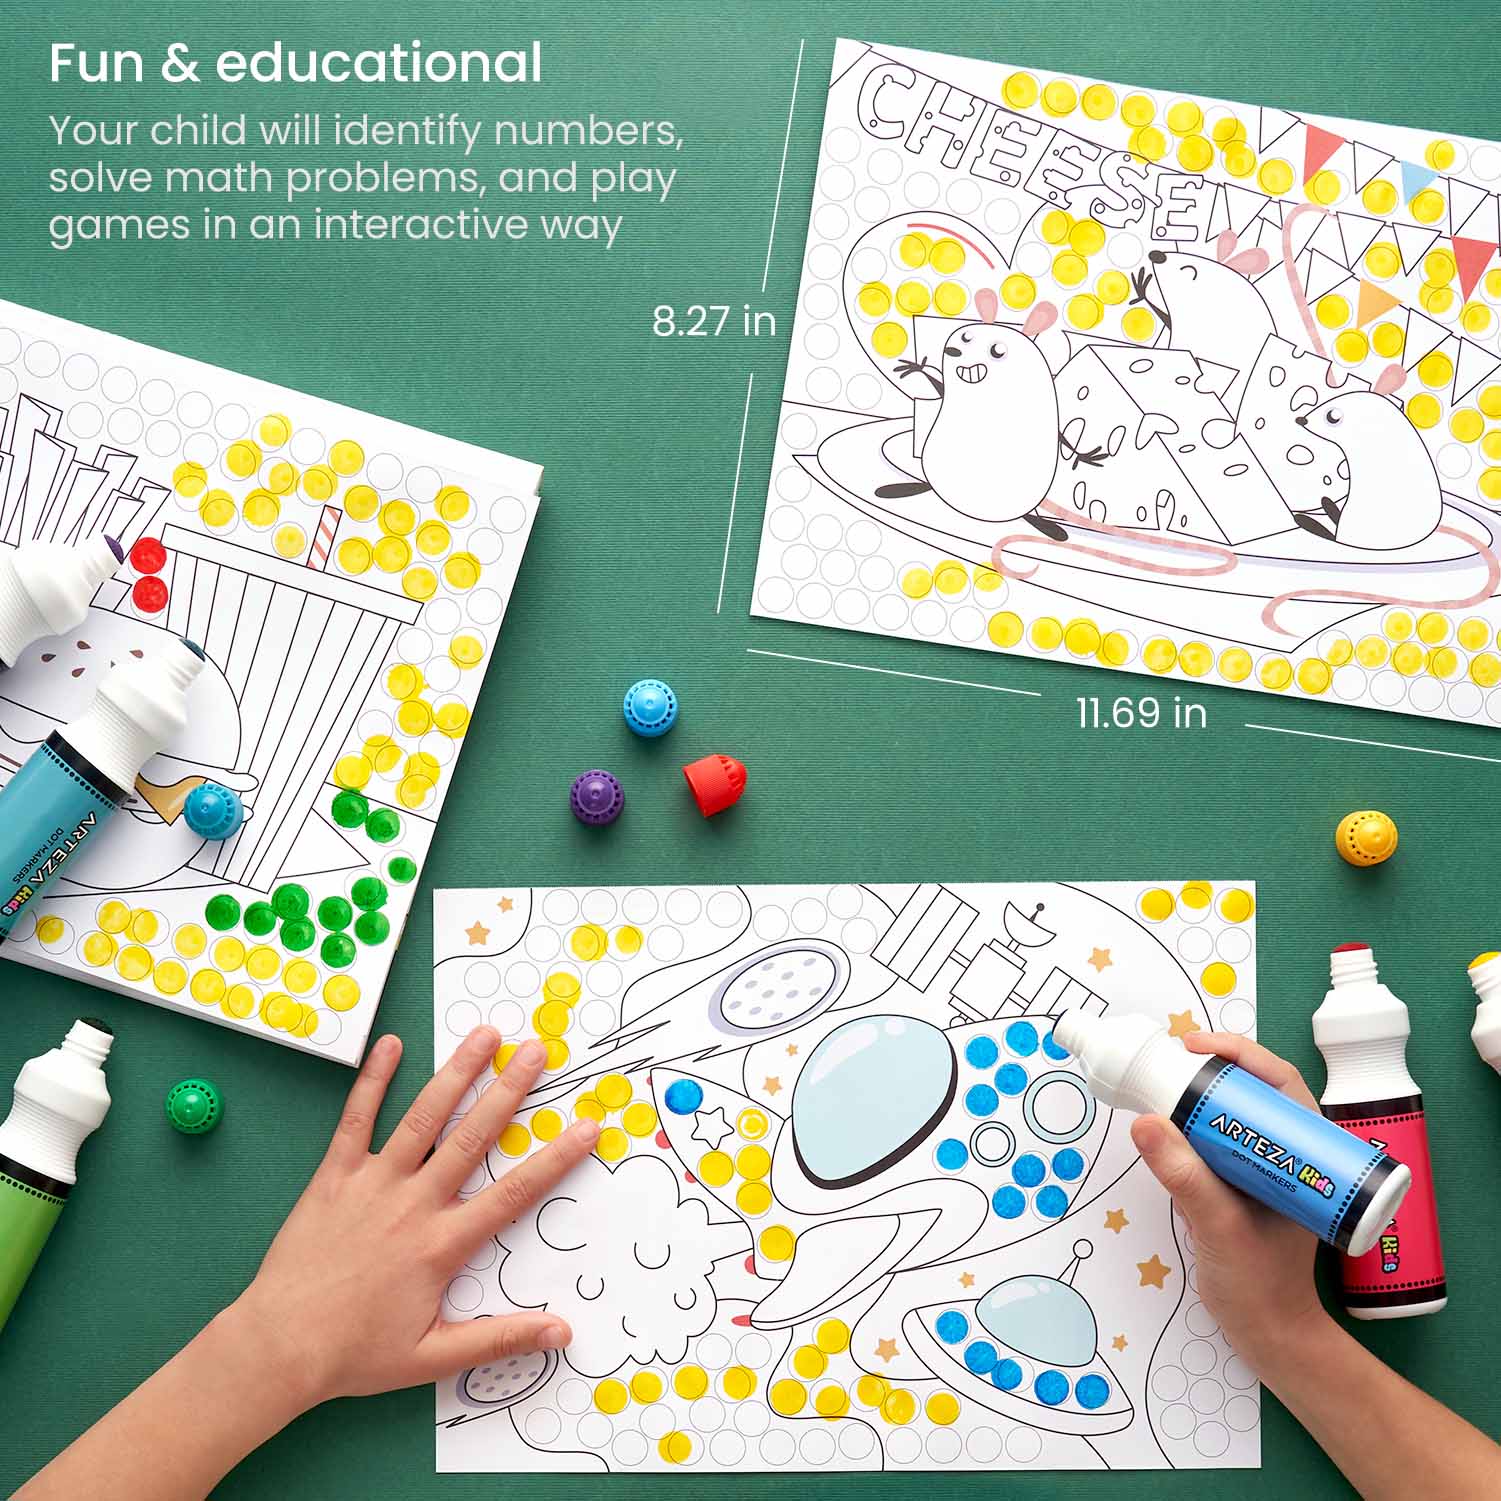 Do a Dot Paint Activity Book for Kids: Dab A Dots Marker Color By